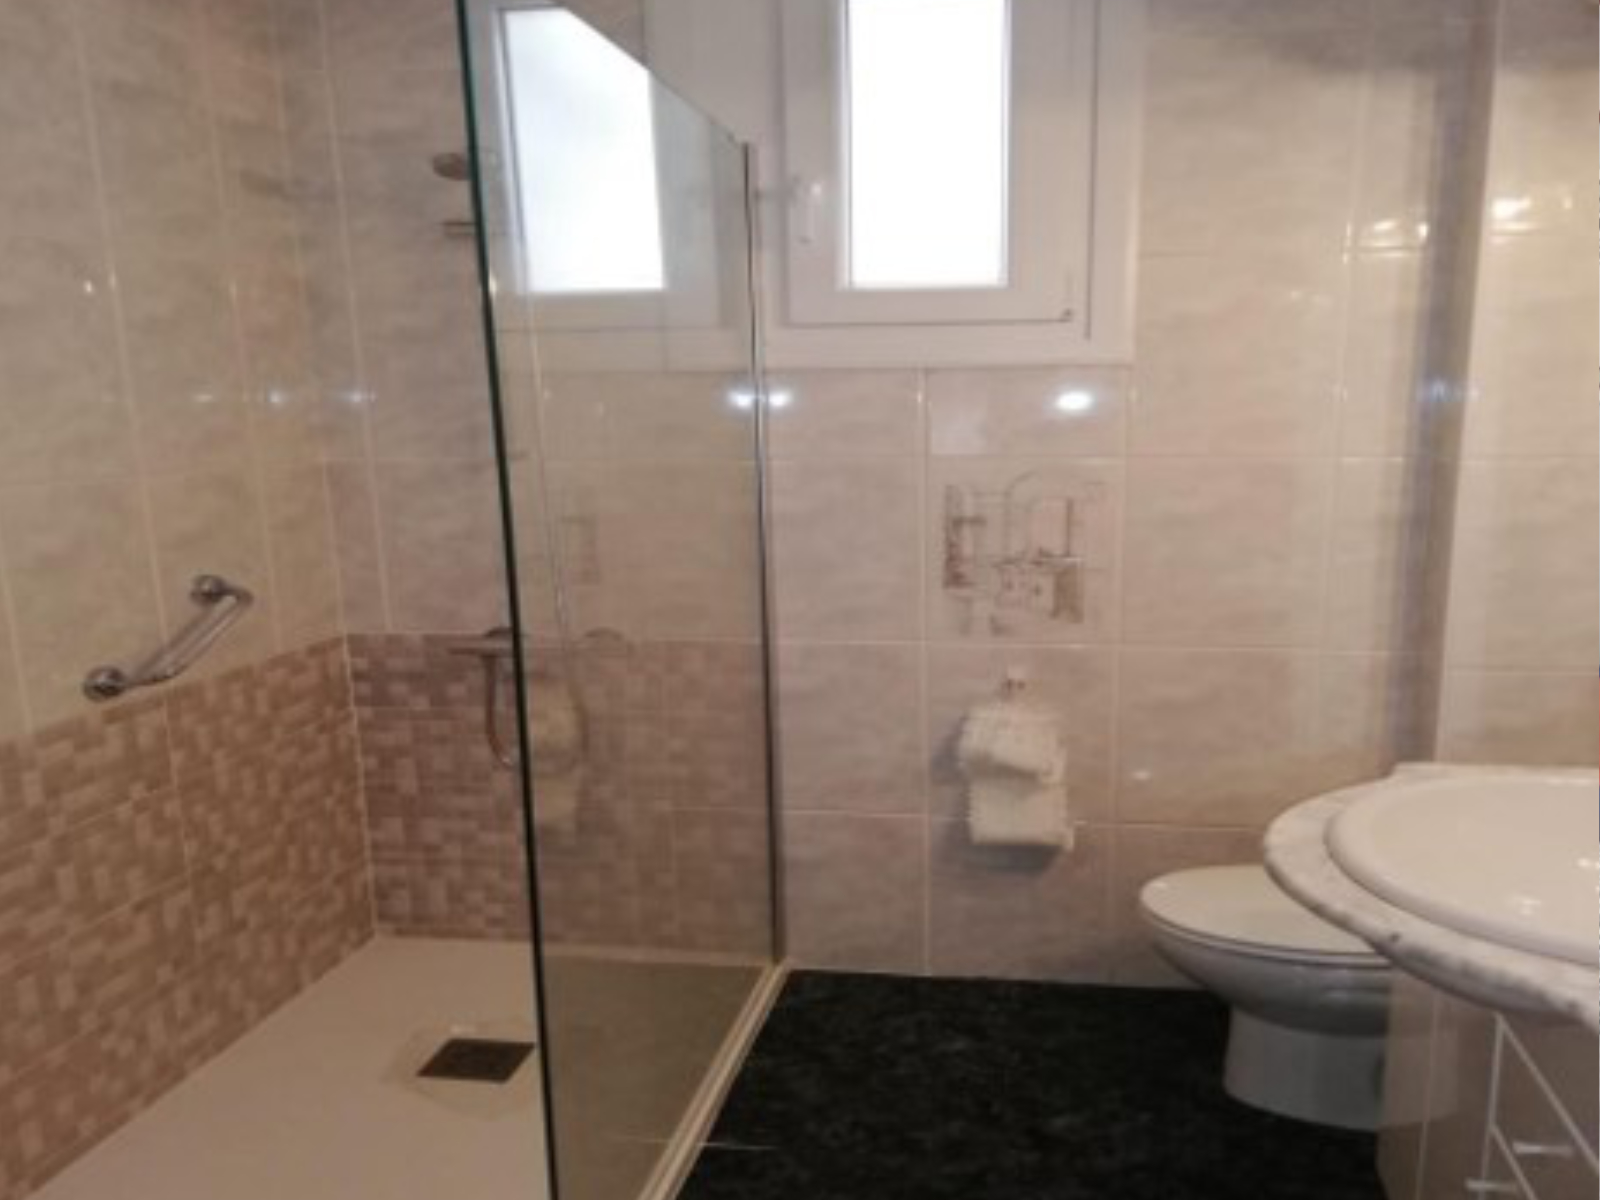 Home-staging-baño-antes